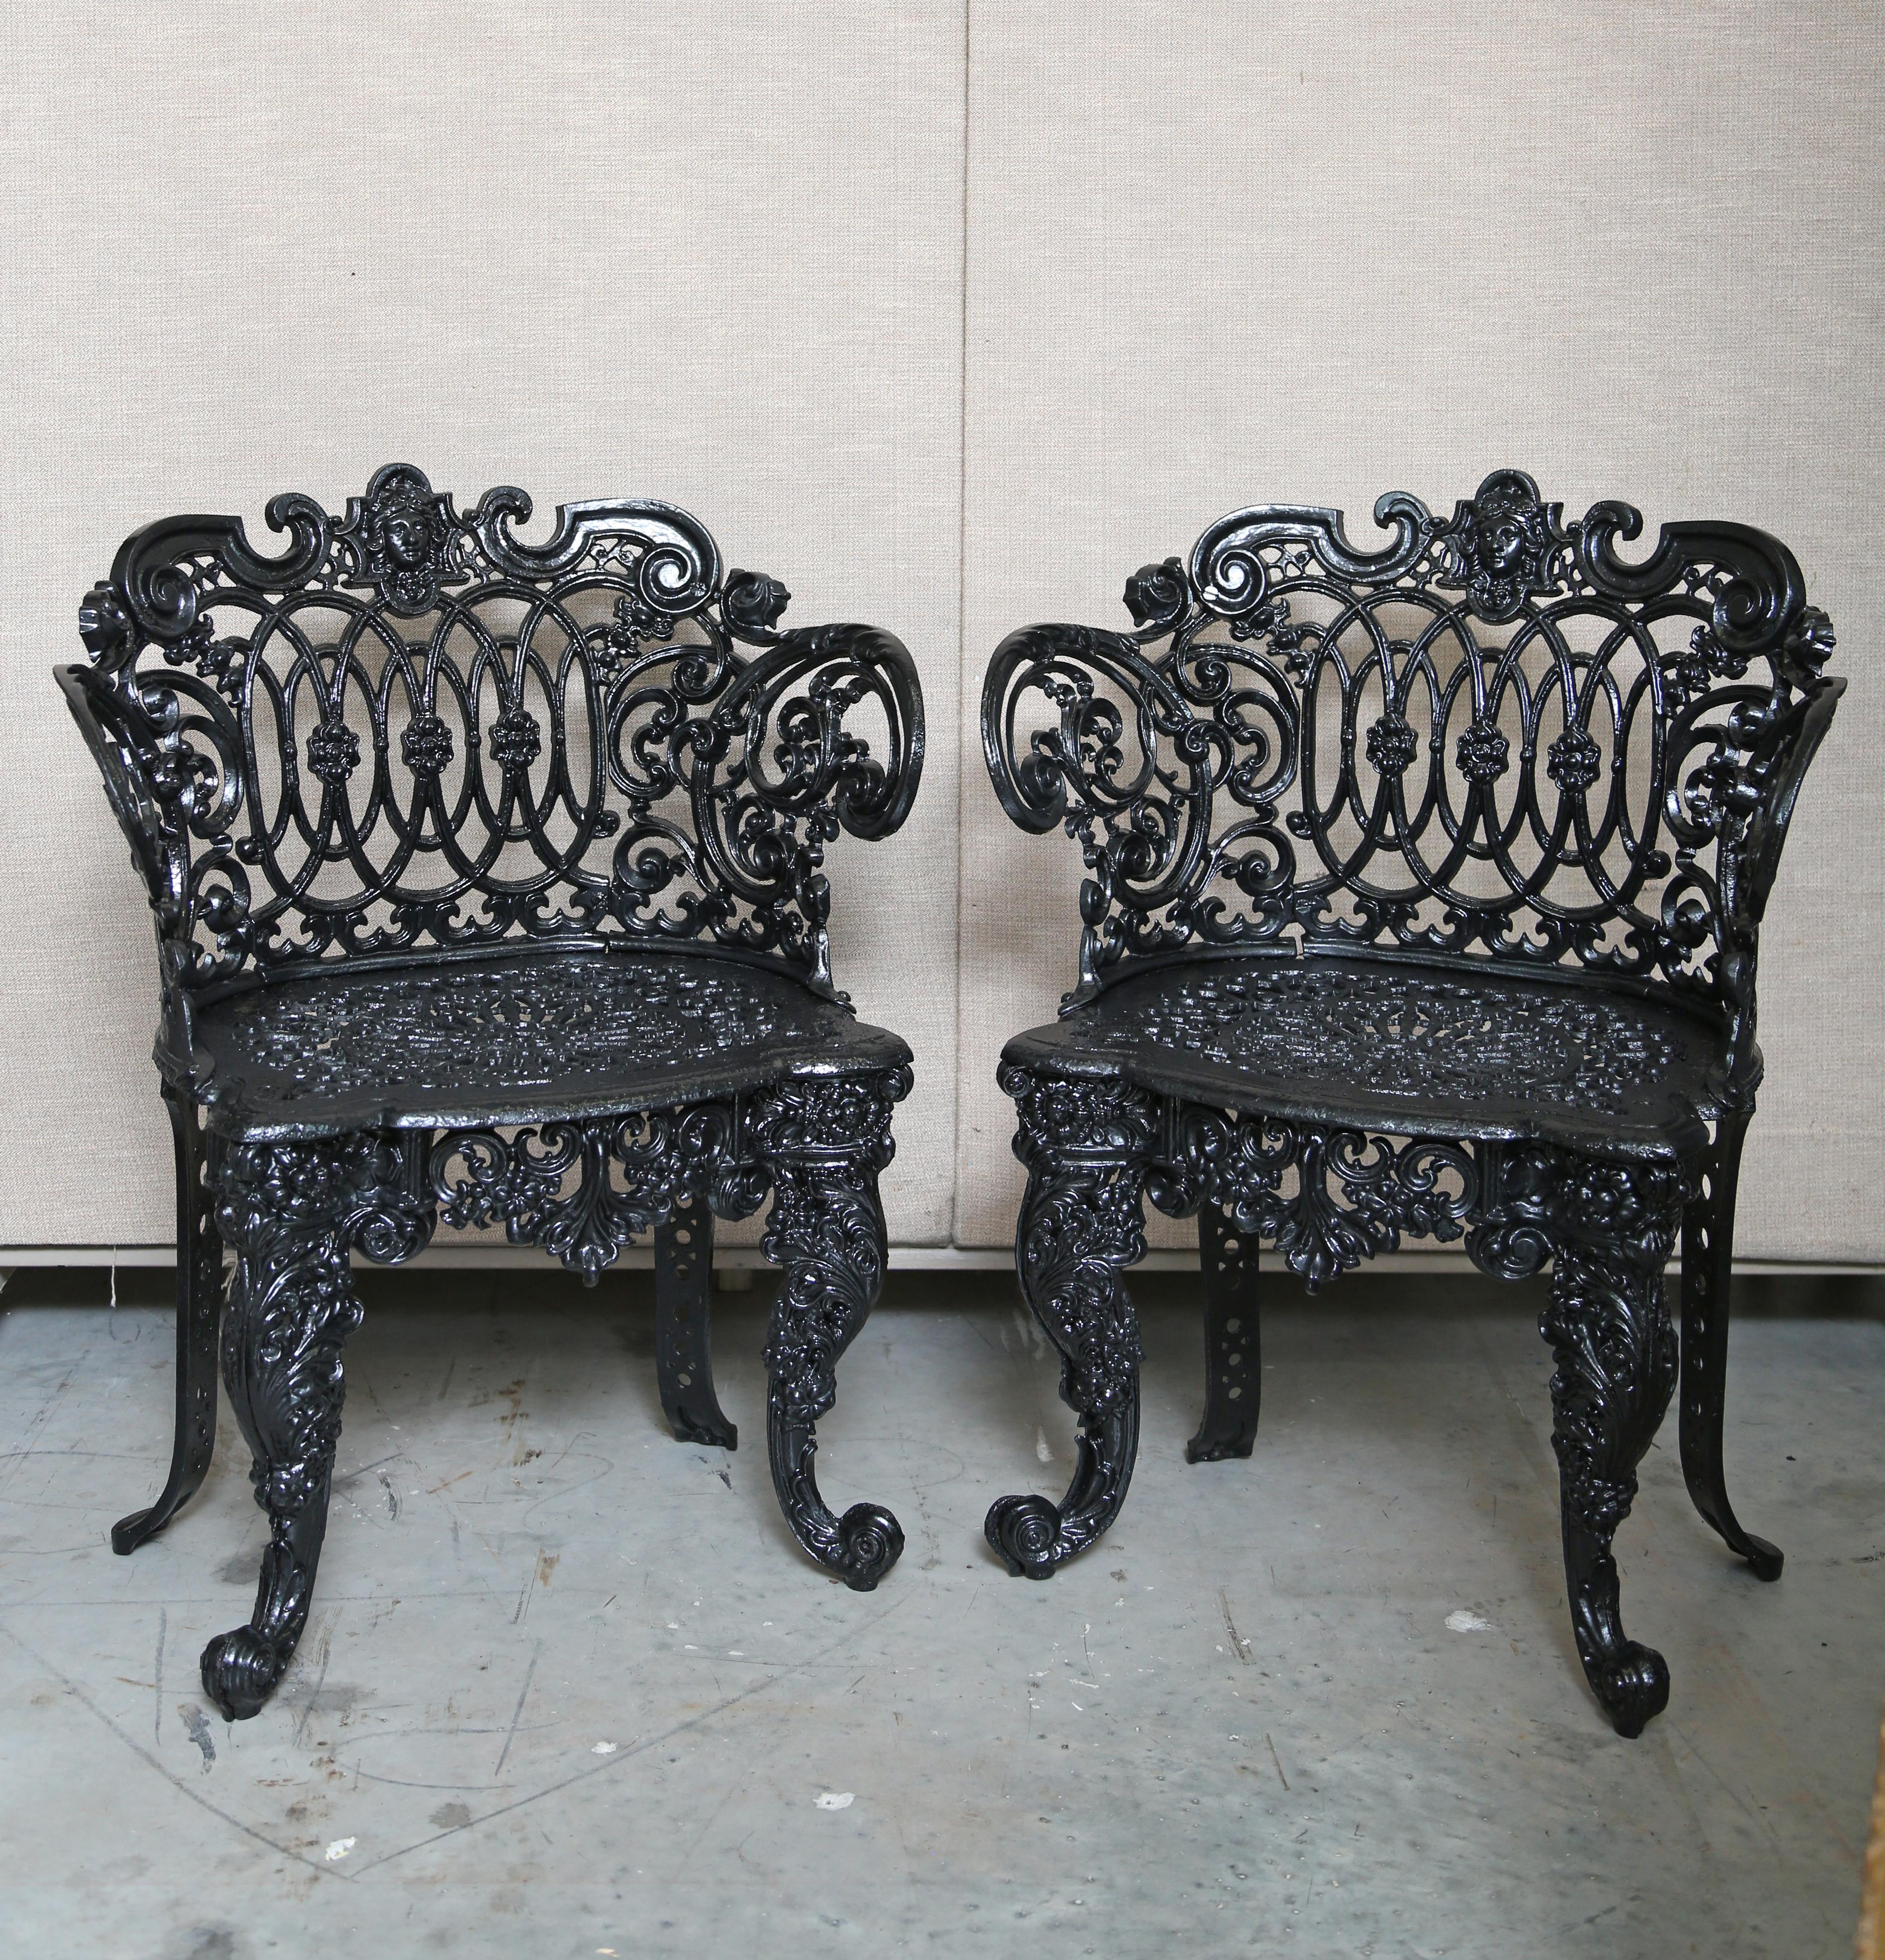 Pair Betsy Ross pattern Victorian cast iron garden chairs. The iron work is superb with the face of Betsy Ross in the center back. Rolled arms and scrolled legs define this bench. This pattern is desirable and hard to find. They have been restored